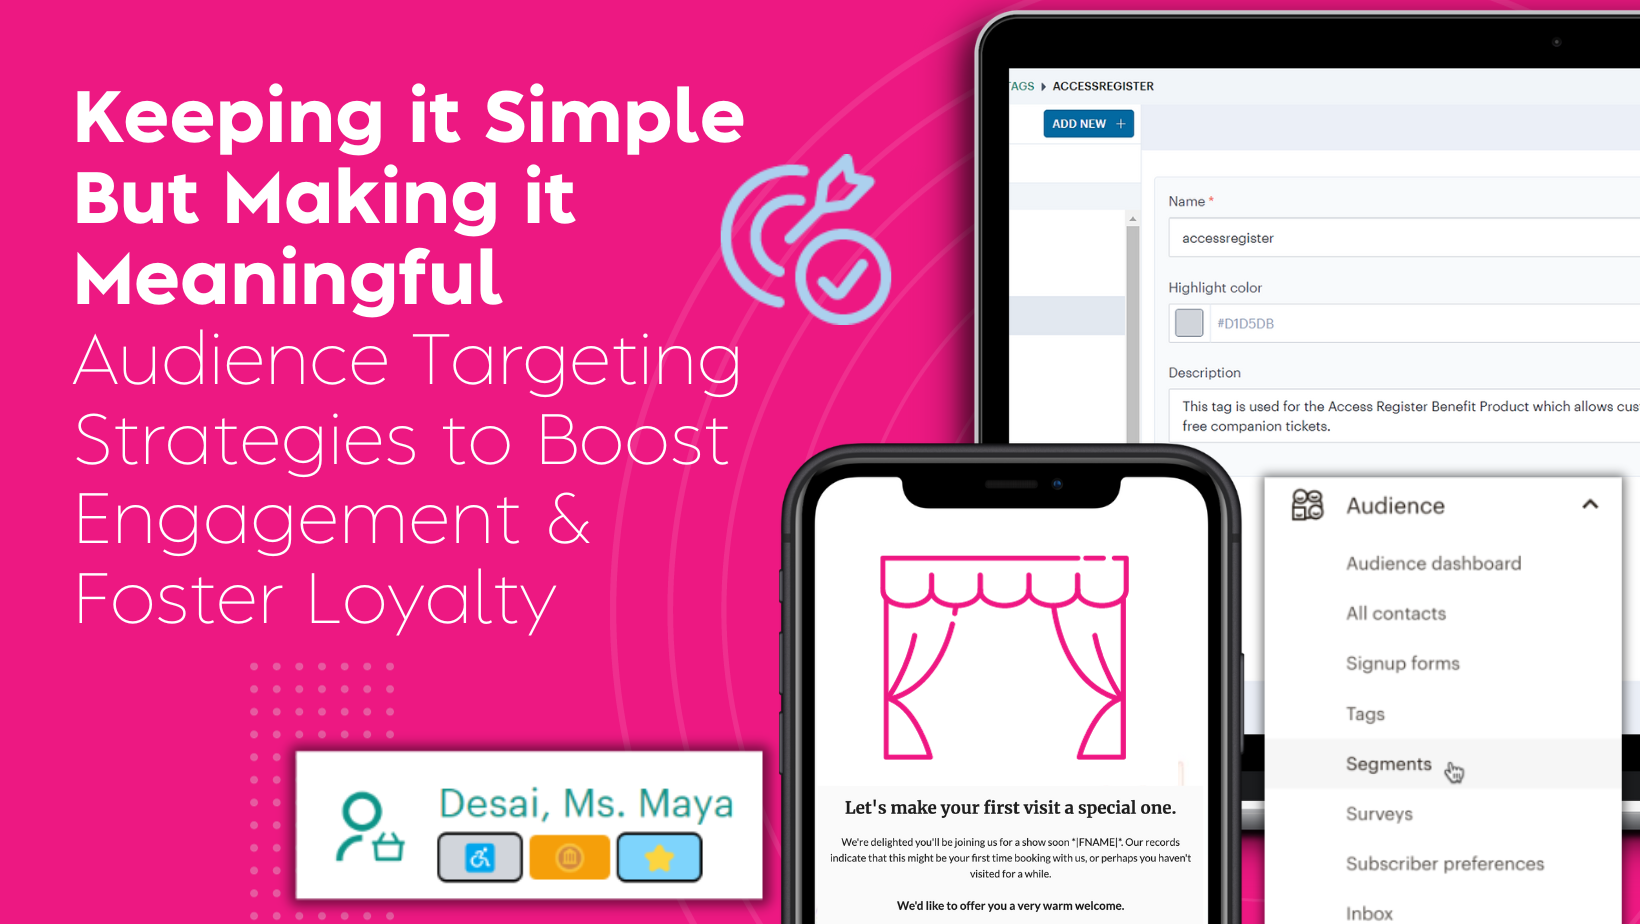 Keeping it Simple But Making it Meaningful: Audience Targeting Strategies to Boost Engagement & Foster Loyalty